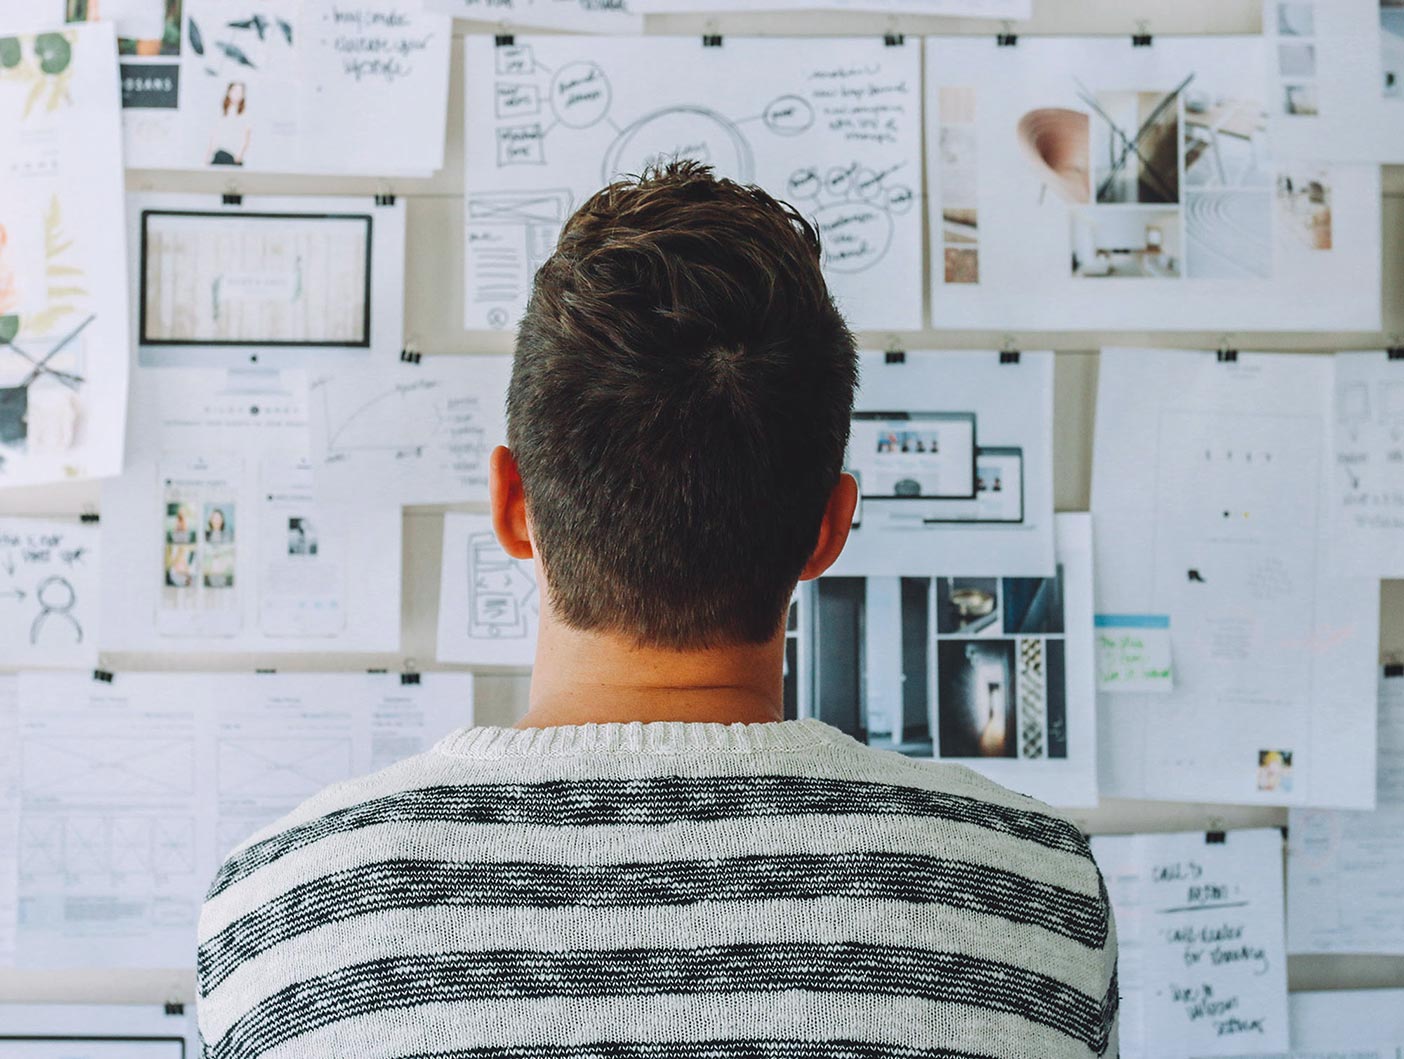 A designer looks over a whiteboard filled with ideas on paper.